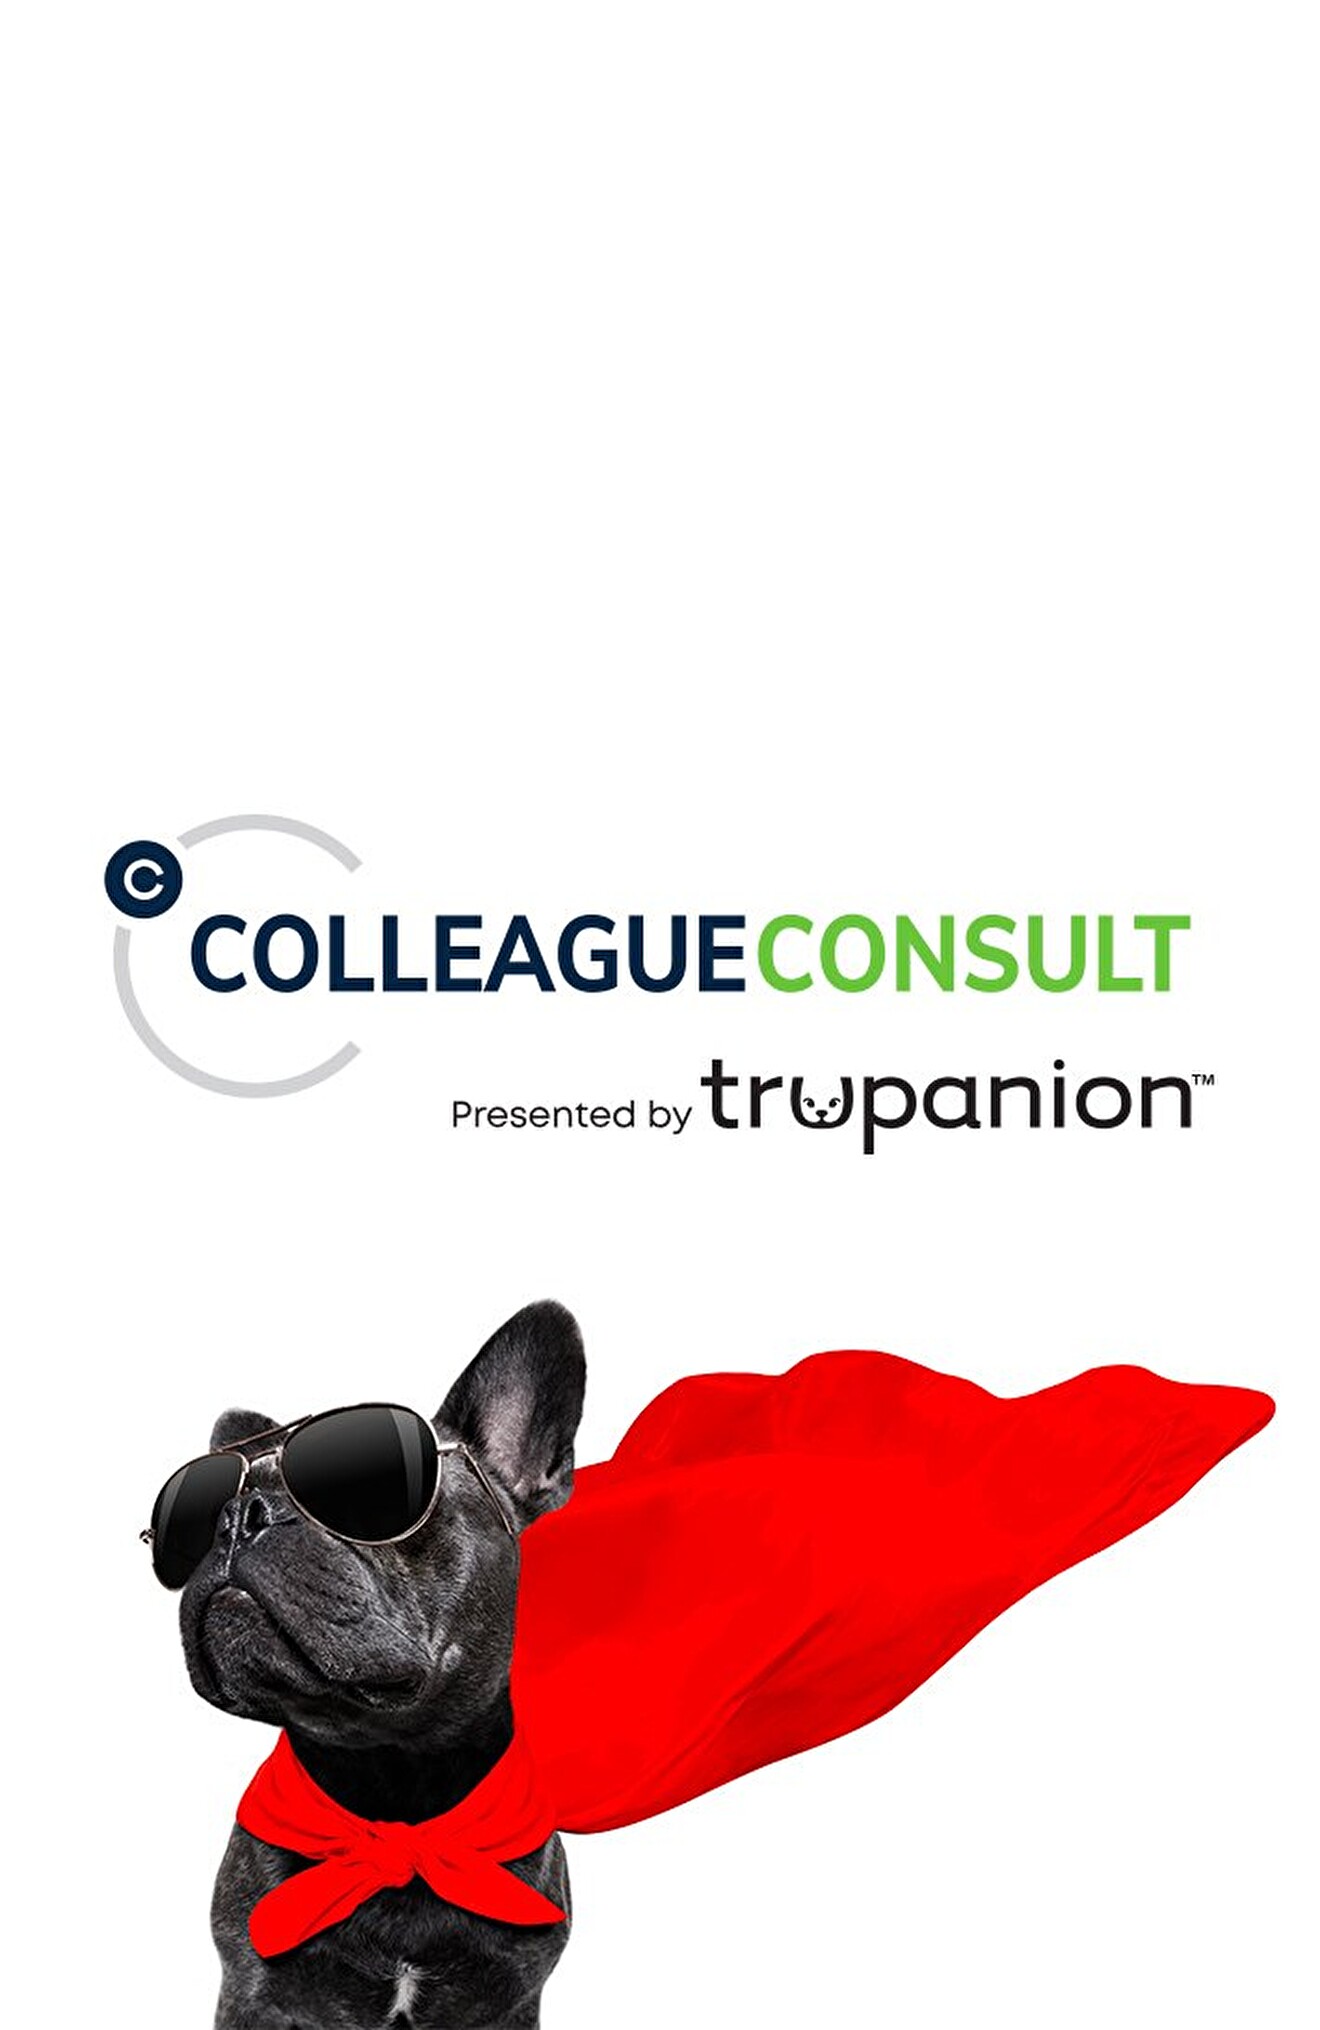 Colleague consult - powered by Trupanion